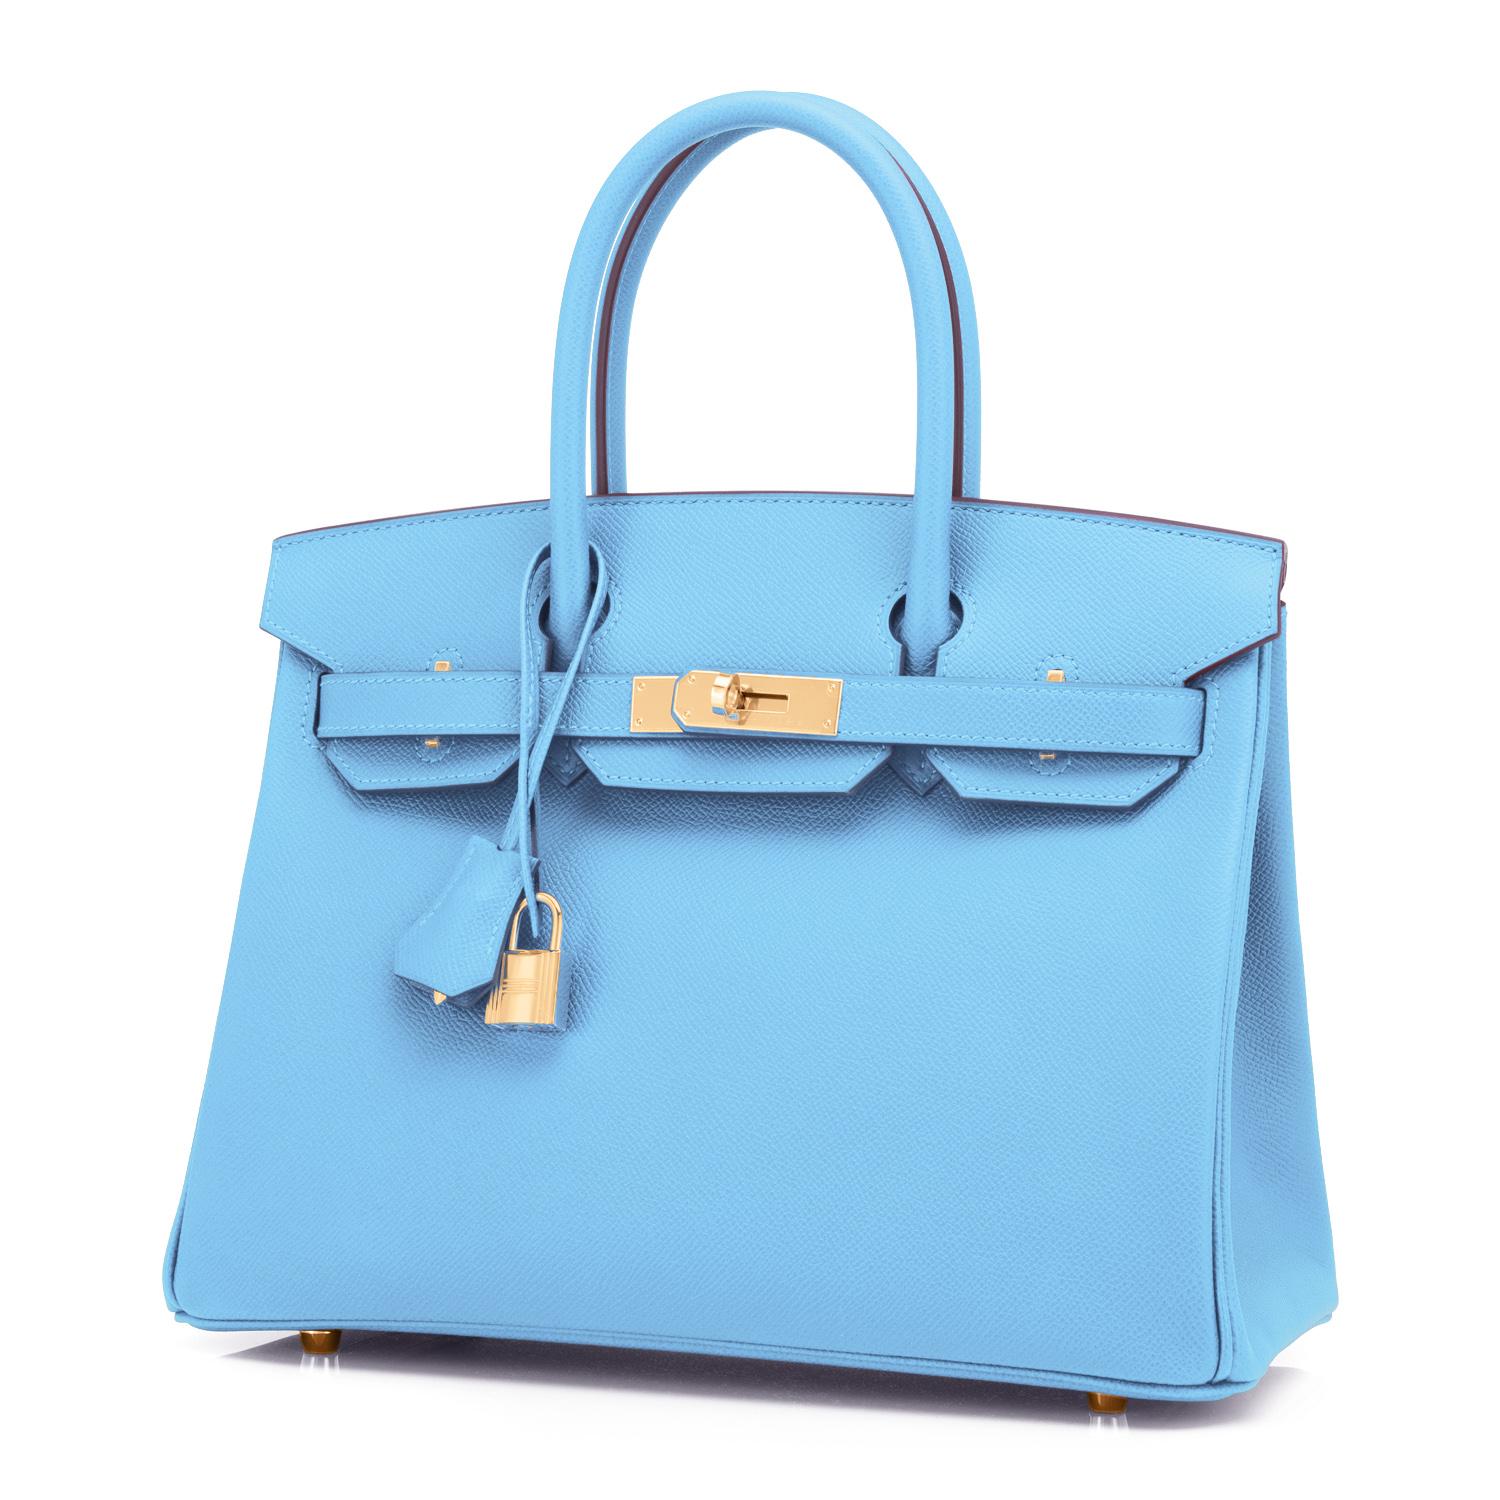 Hermes Birkin 30cm Celeste Birkin Sky Blue Epsom Gold Hardware Bag NEW IN BOX
Just purchased from Hermes store! Bag bears new interior 2020 Y Stamp.
Brand New in Box. Store fresh. Pristine condition (with plastic on hardware).
Perfect gift! Coming